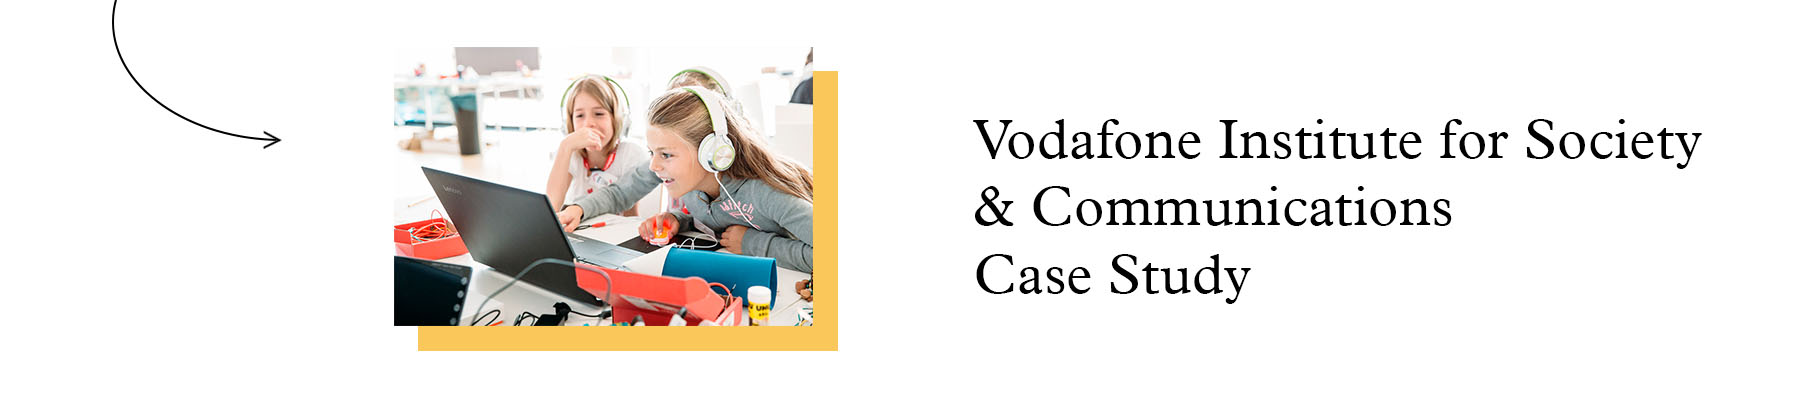 Vodafone Institute for Society & Communications - Case Study